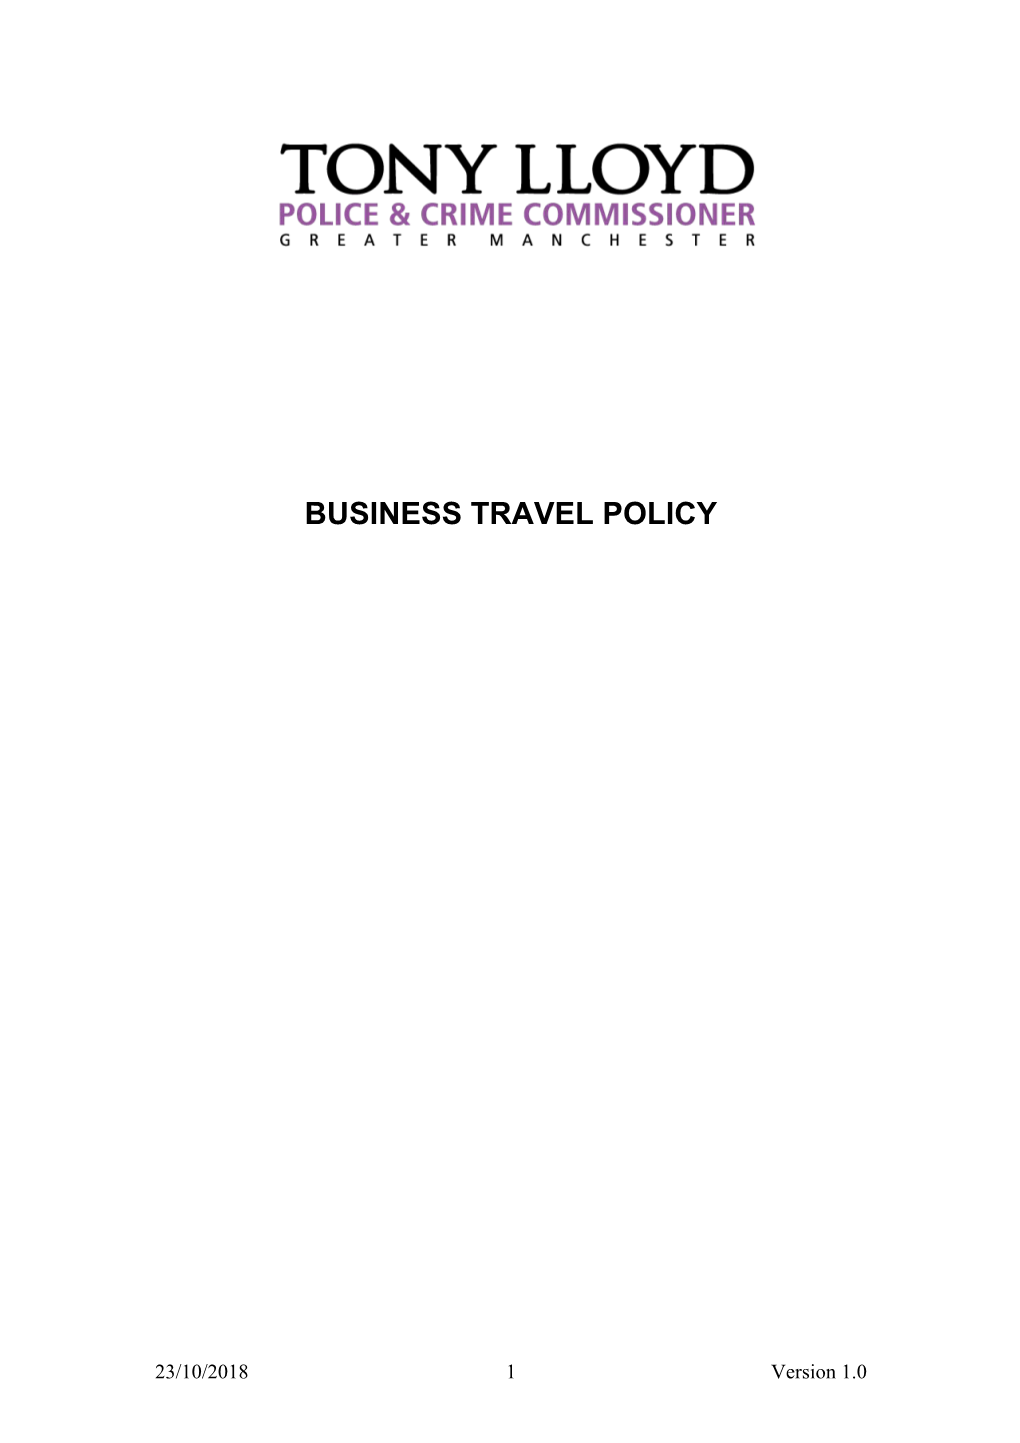 Business Travel Policy